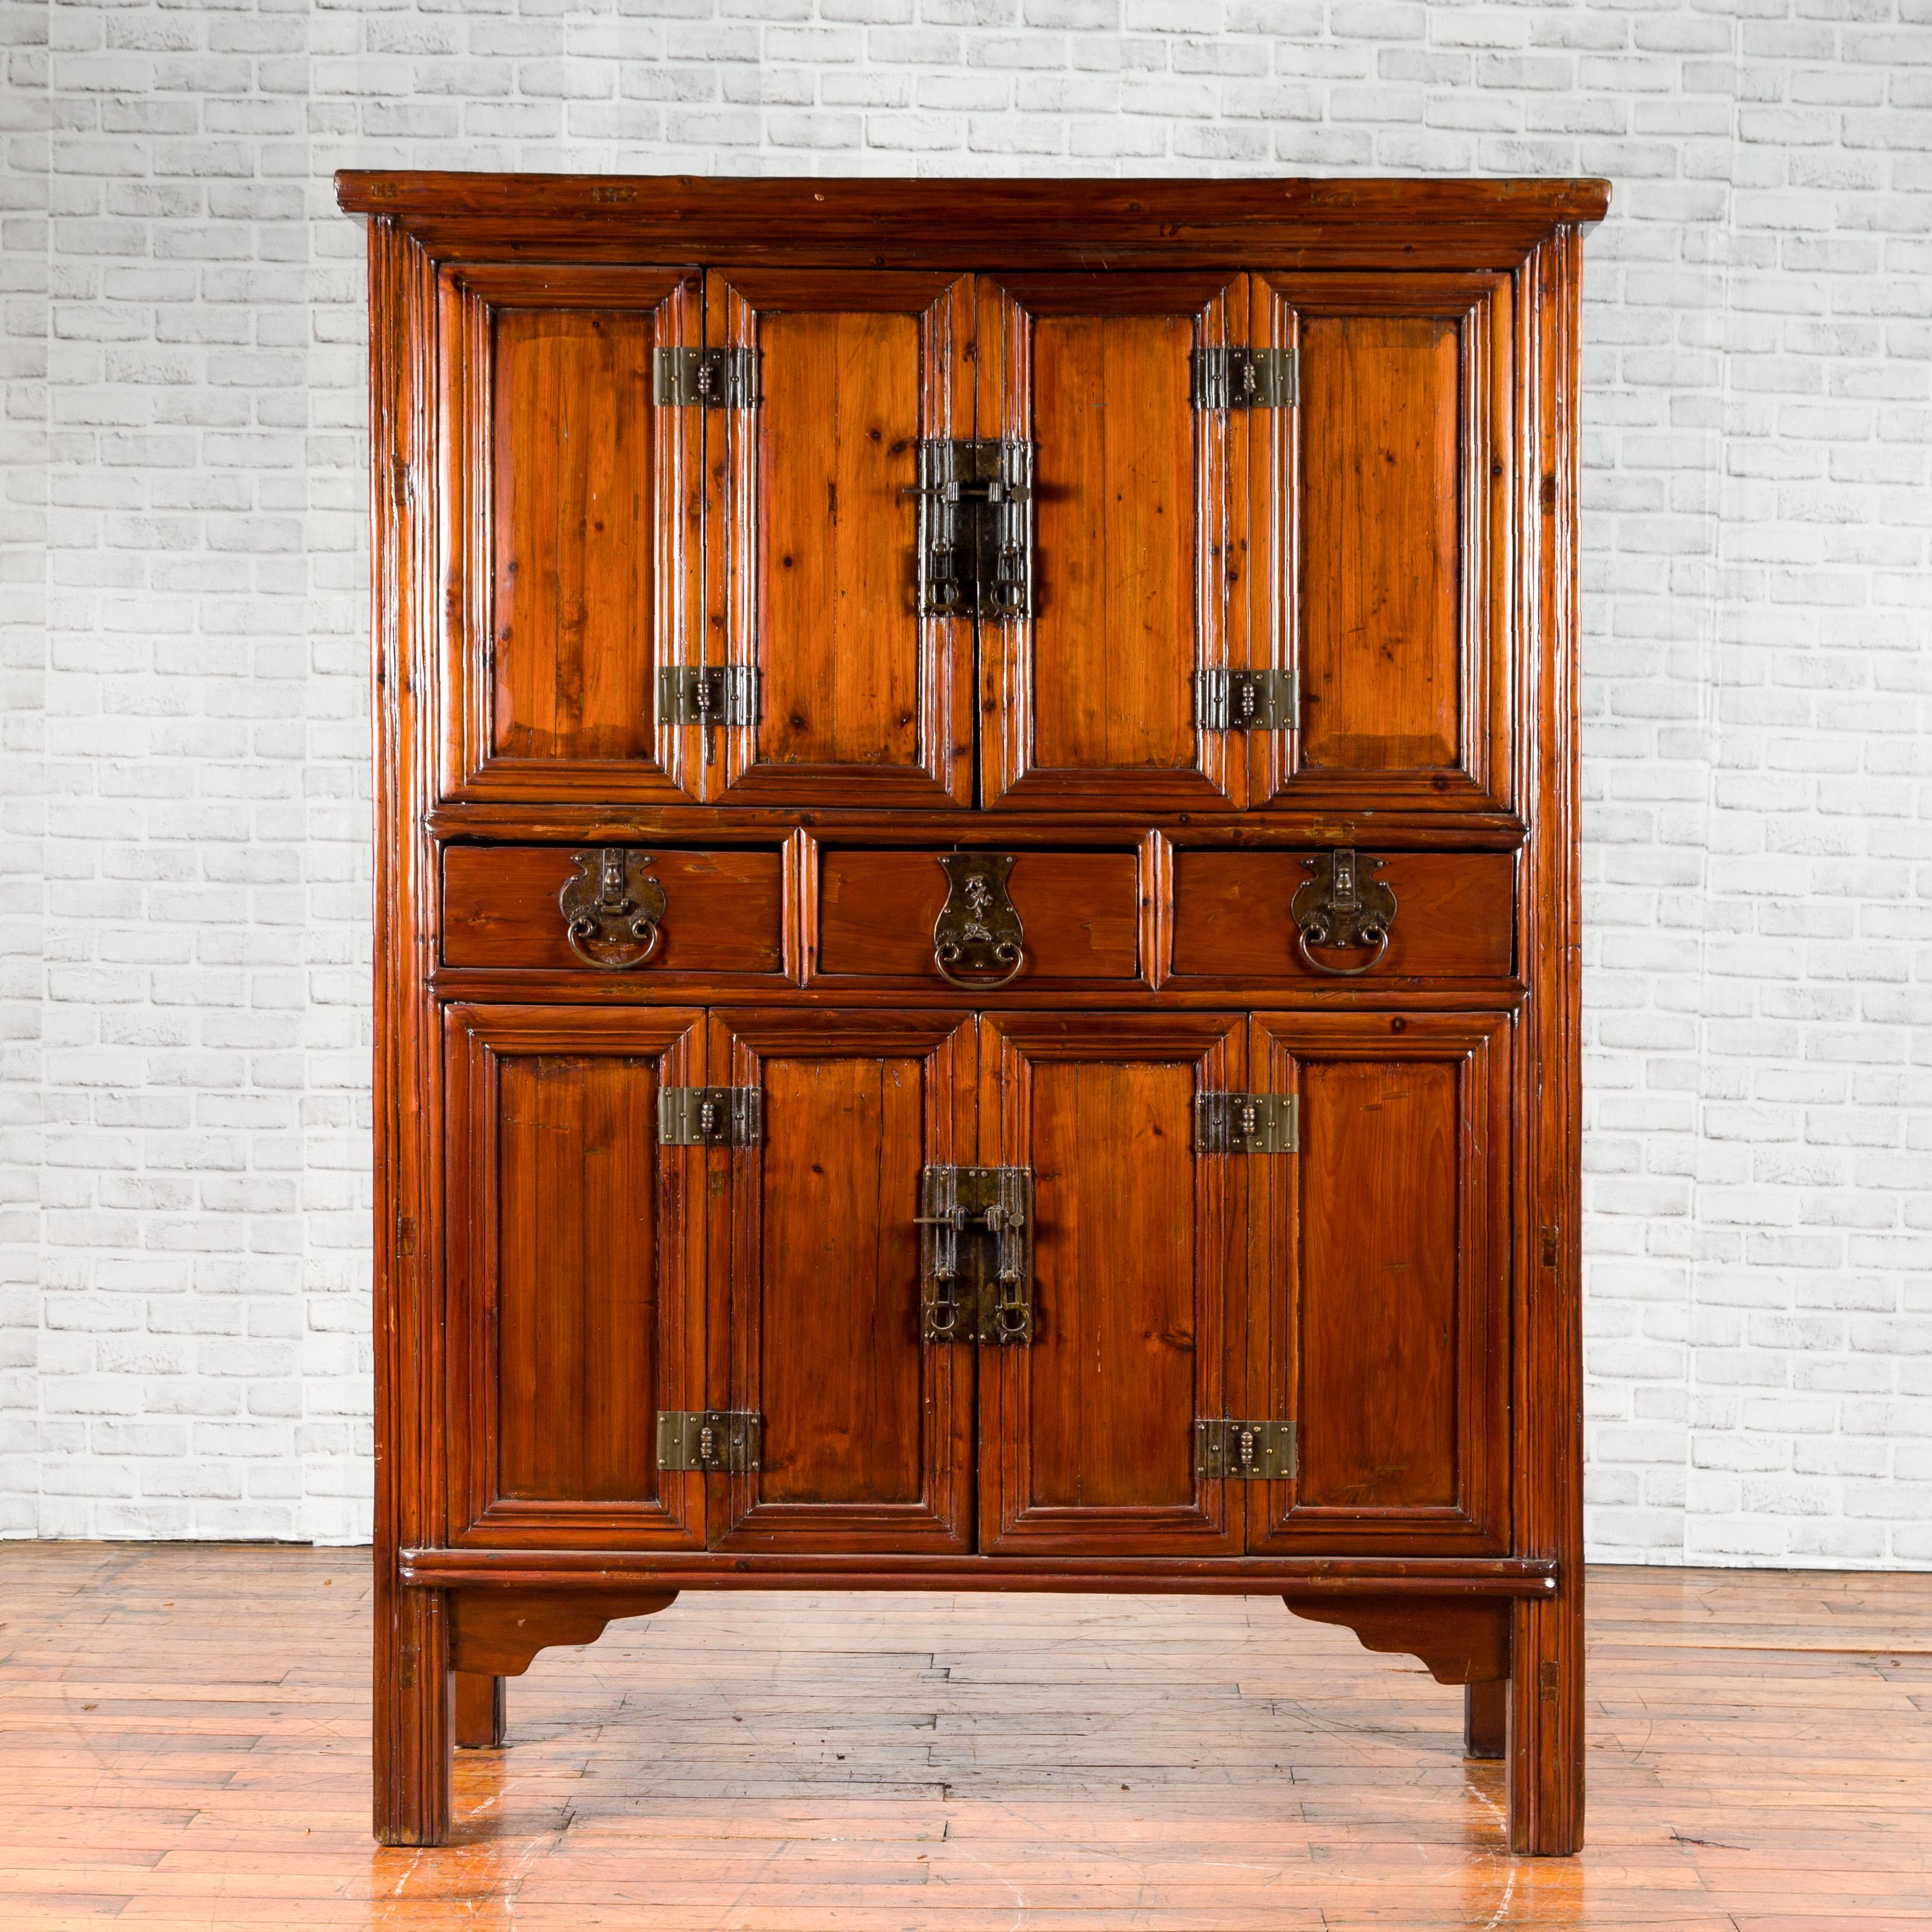 A Chinese Qing Dynasty period four accordion door cabinet from the 19th century, with three drawers and brass hardware. Created in China during the Qing Dynasty, this brown cabinet features two pairs of accordion doors fitted with brass hardware,